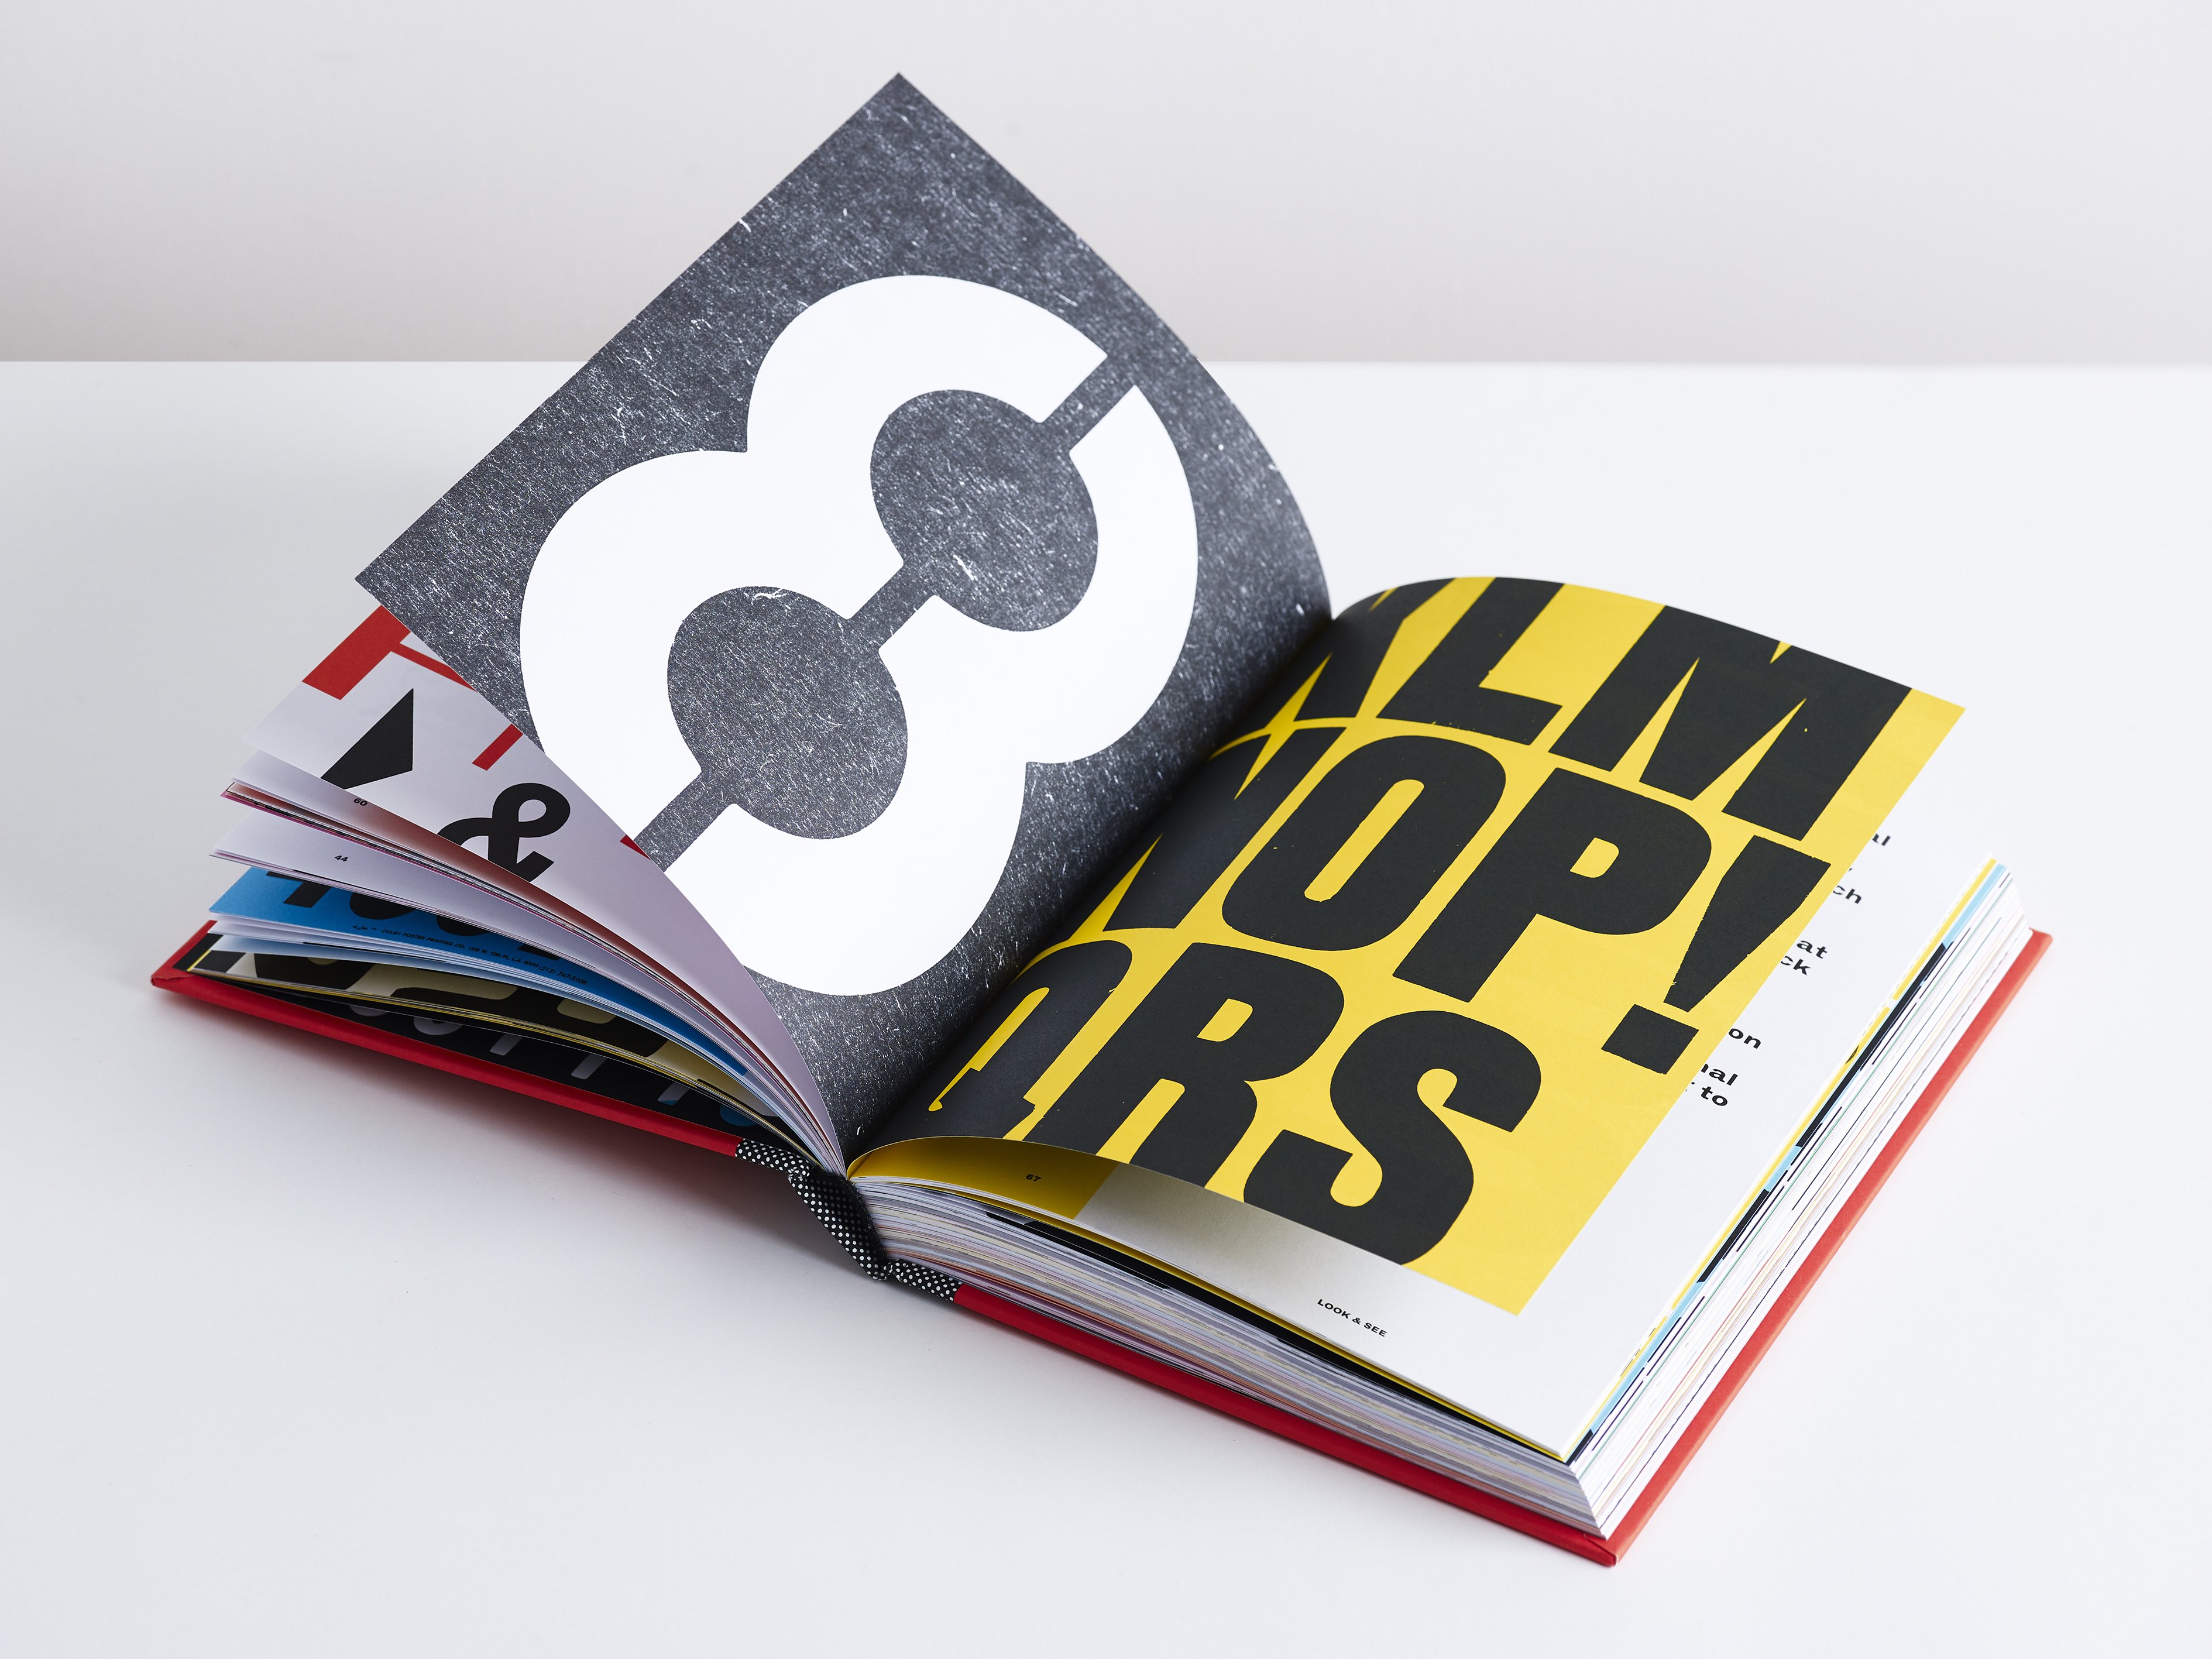 Look & See by Anthony Burrill